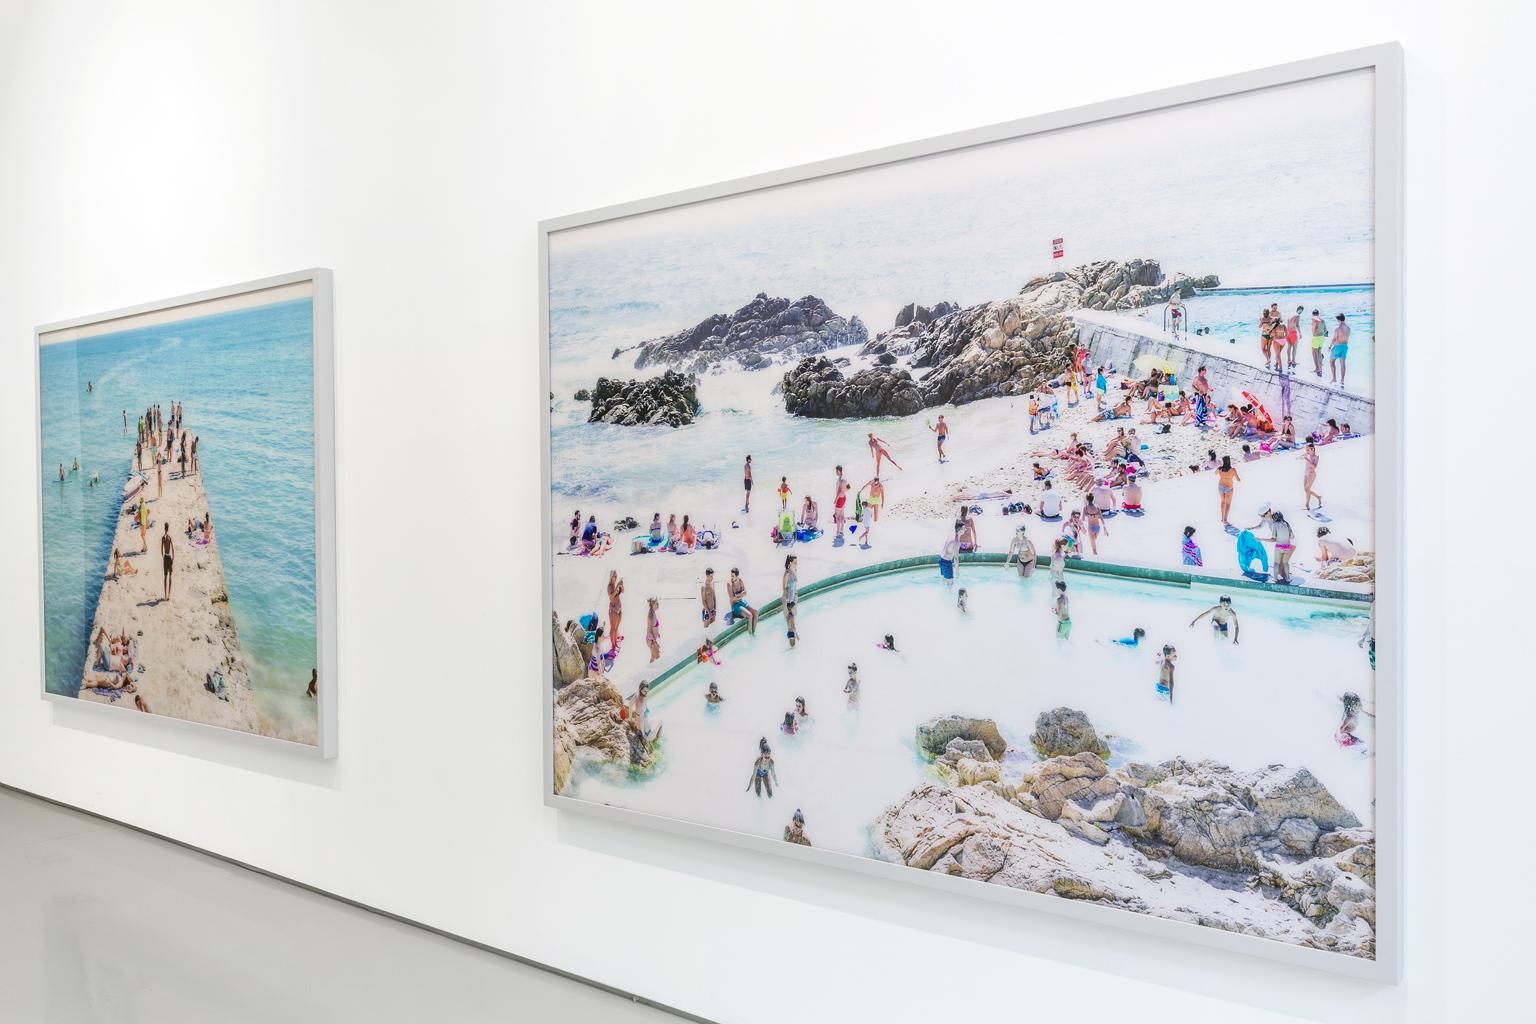 large format photograph of a summer beach scene along Portugal's Atlantic coast by iconic Italian photographer Massimo Vitali, renowned for his grand scale topographical observations of the rites and rituals of modern leisure

Carcavelos Pier Paddle